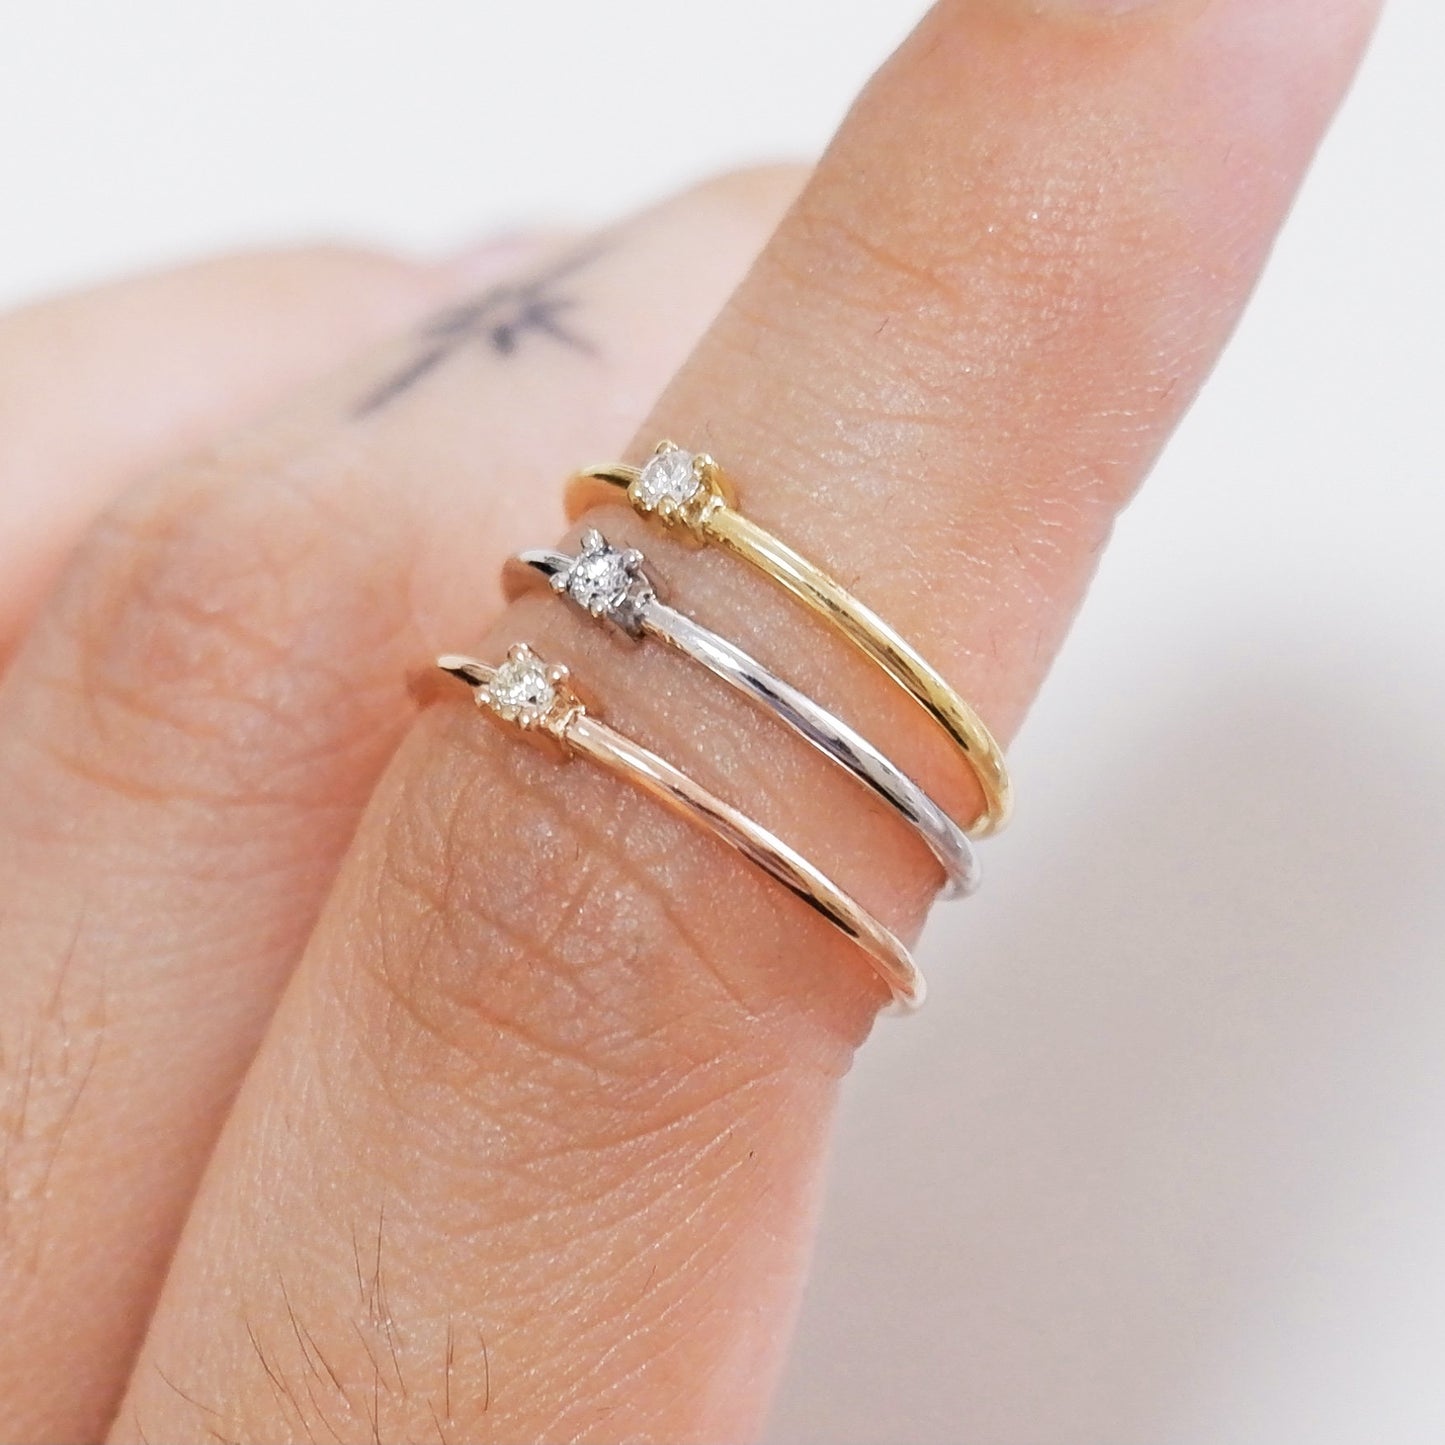 The Tiny Diamond Ring in Solid Gold